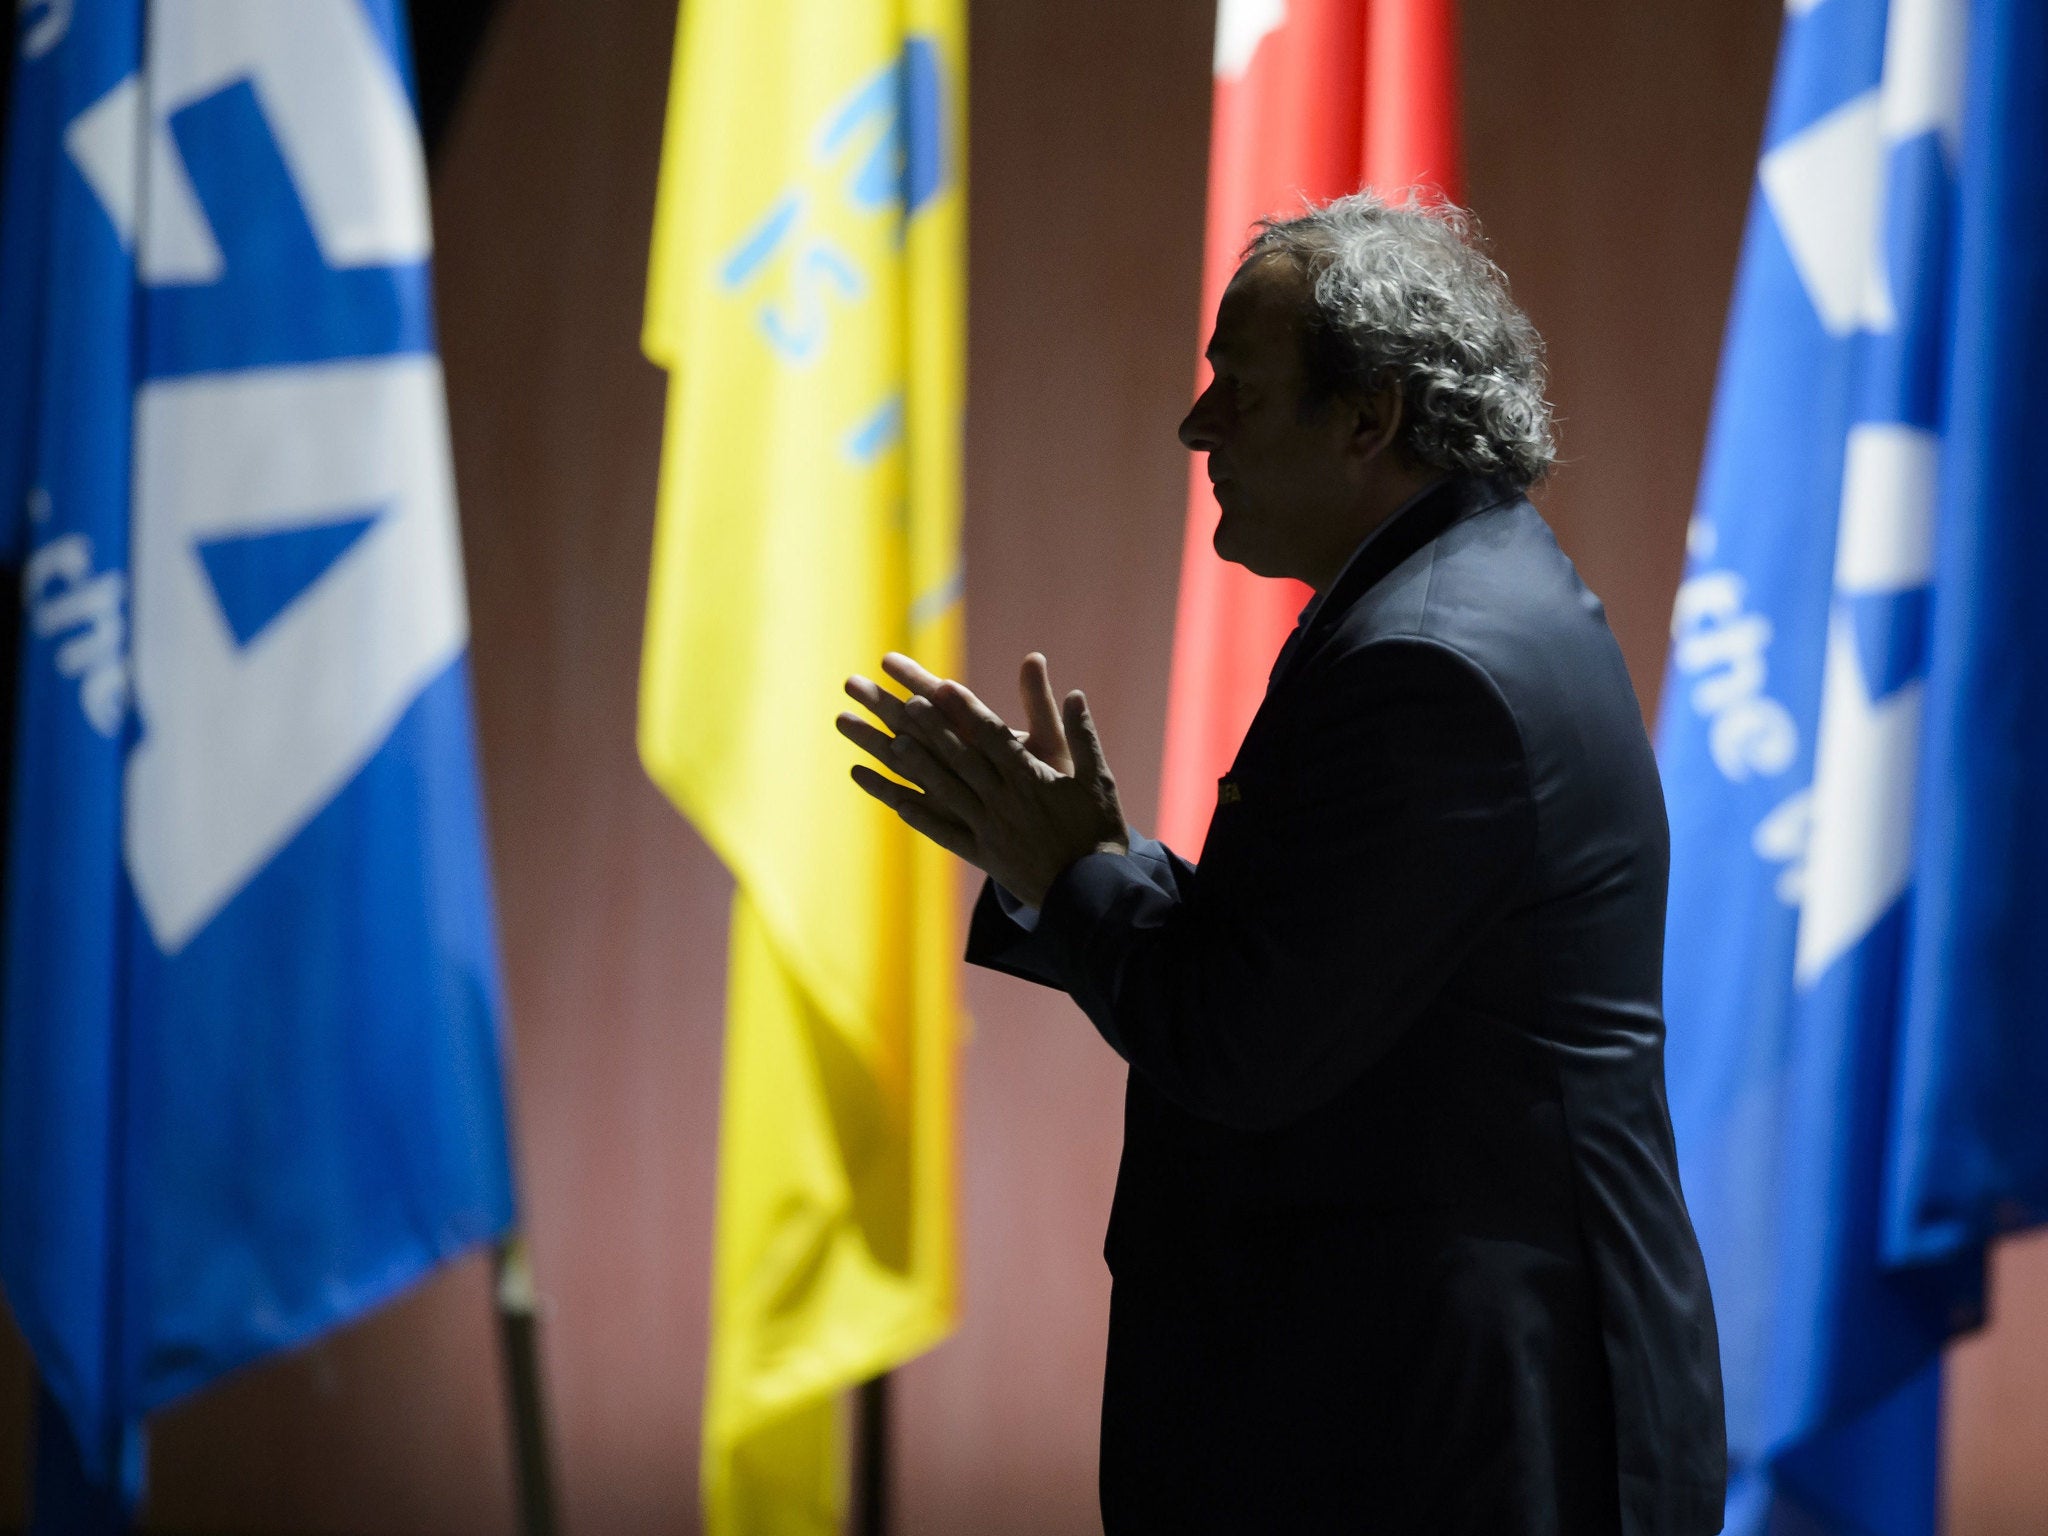 Michel Platini, the Uefa president, pictured in silhouette at the 65th FIFA Congress in Zurich